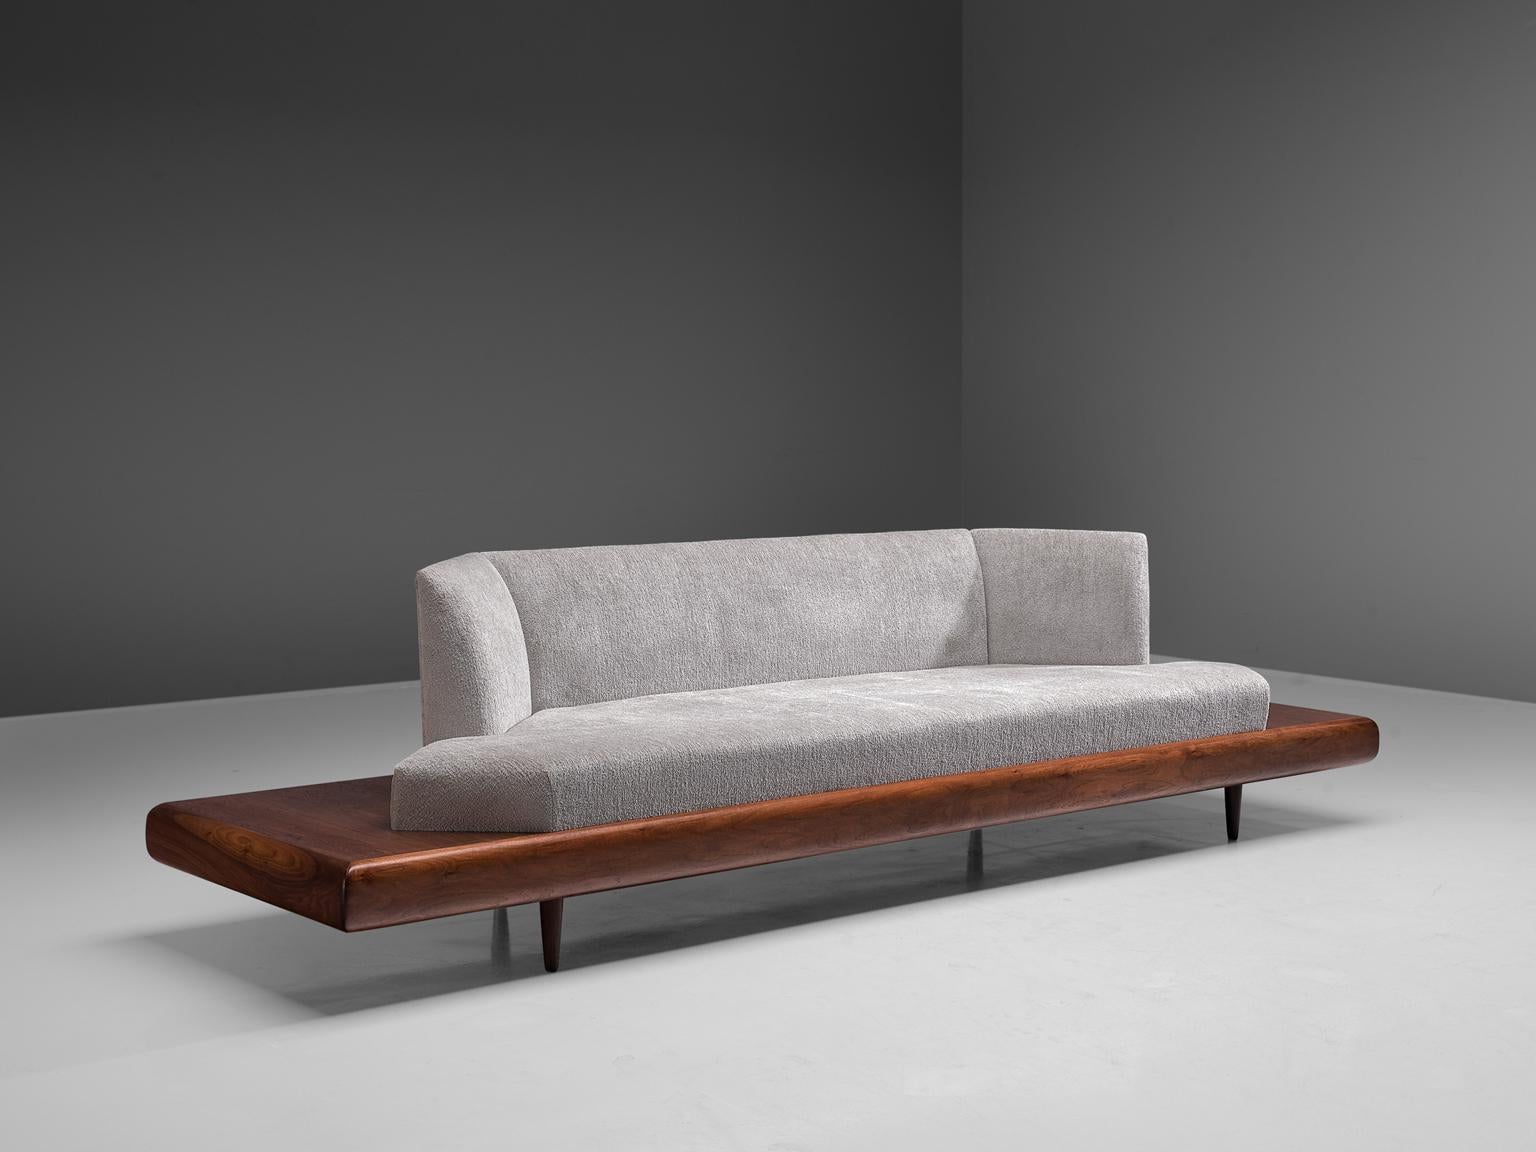 Adrian Pearsall, 'Platform' sofa model '2006S', in soft grey fabric of Pierre Frey and walnut, United States, 1960s

Classic, soft shaped sofa has a unique feel and although it is modest and simplistic it also shows soft, delicate lines and